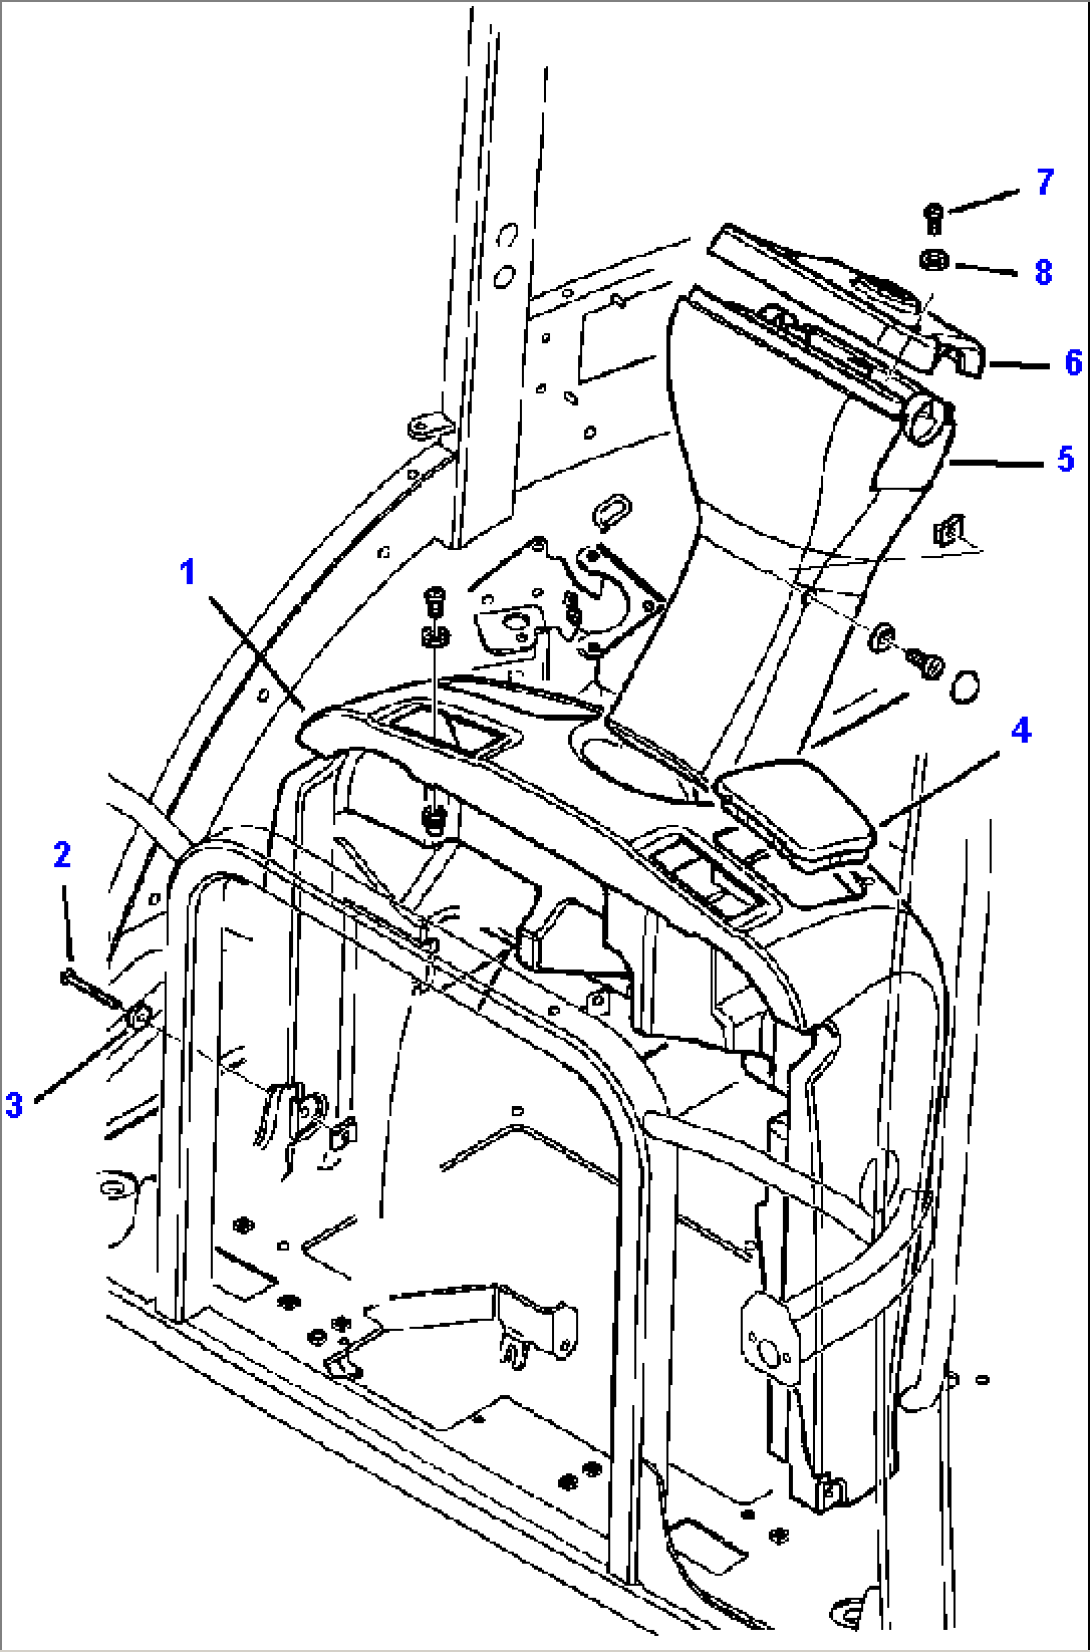 K5008-01A0 CAB ASSEMBLY FRONT COLUMN